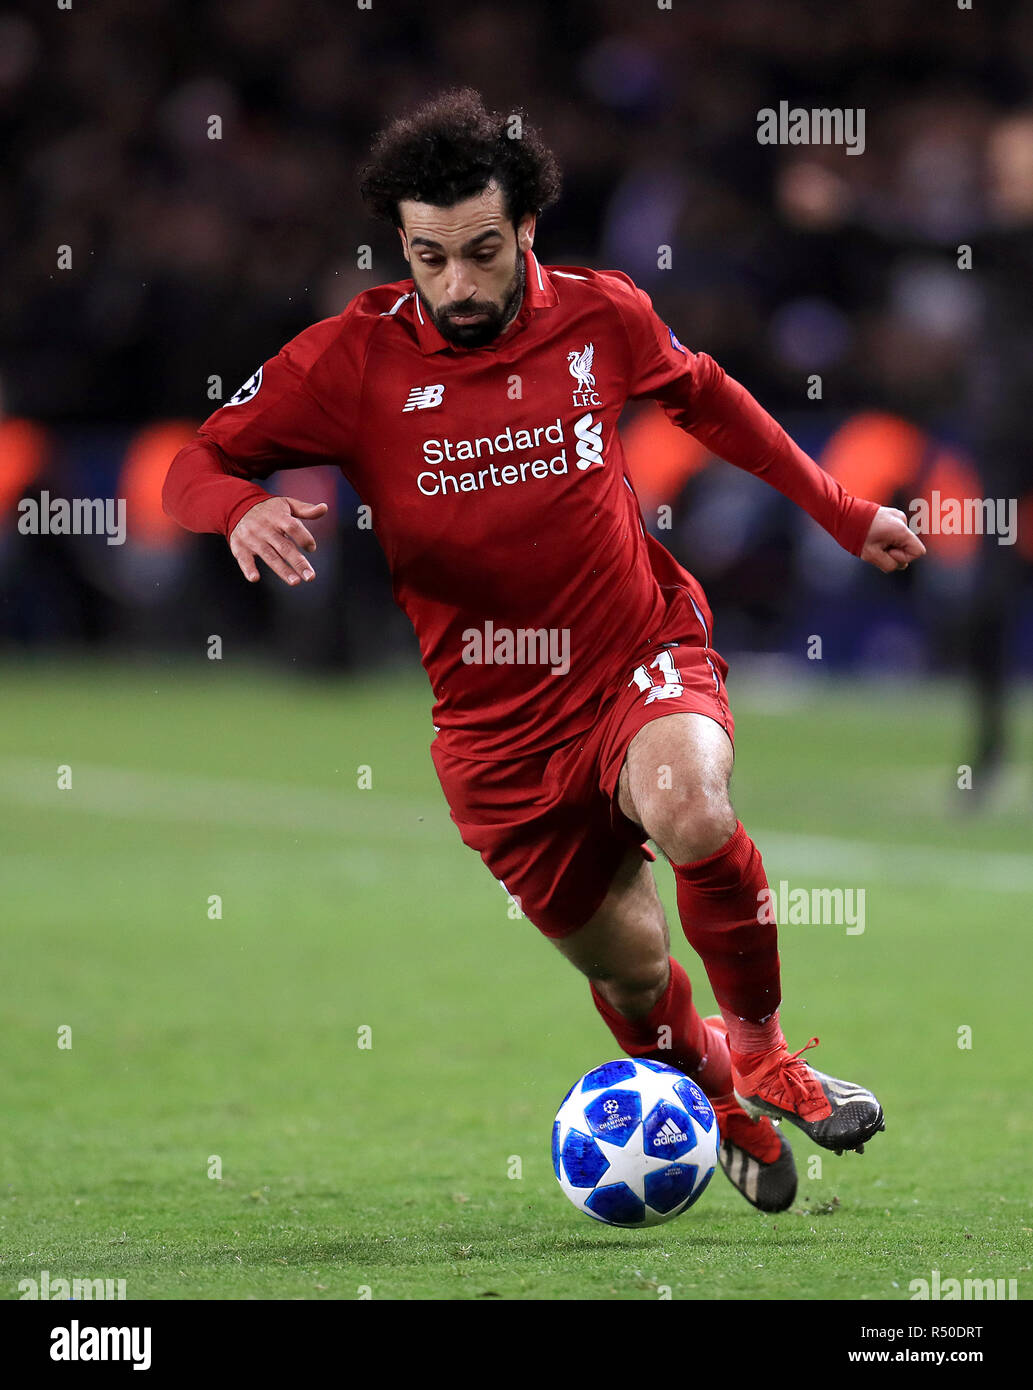 Liverpool's Mohamed Salah during the UEFA Champions League, Group C match at the Parc des Princes, Paris. PRESS ASSOCIATION Photo. Picture date: Wednesday November 28, 2018. See PA story SOCCER PSG. Photo credit should read: Mike Egerton/PA Wire. Stock Photo